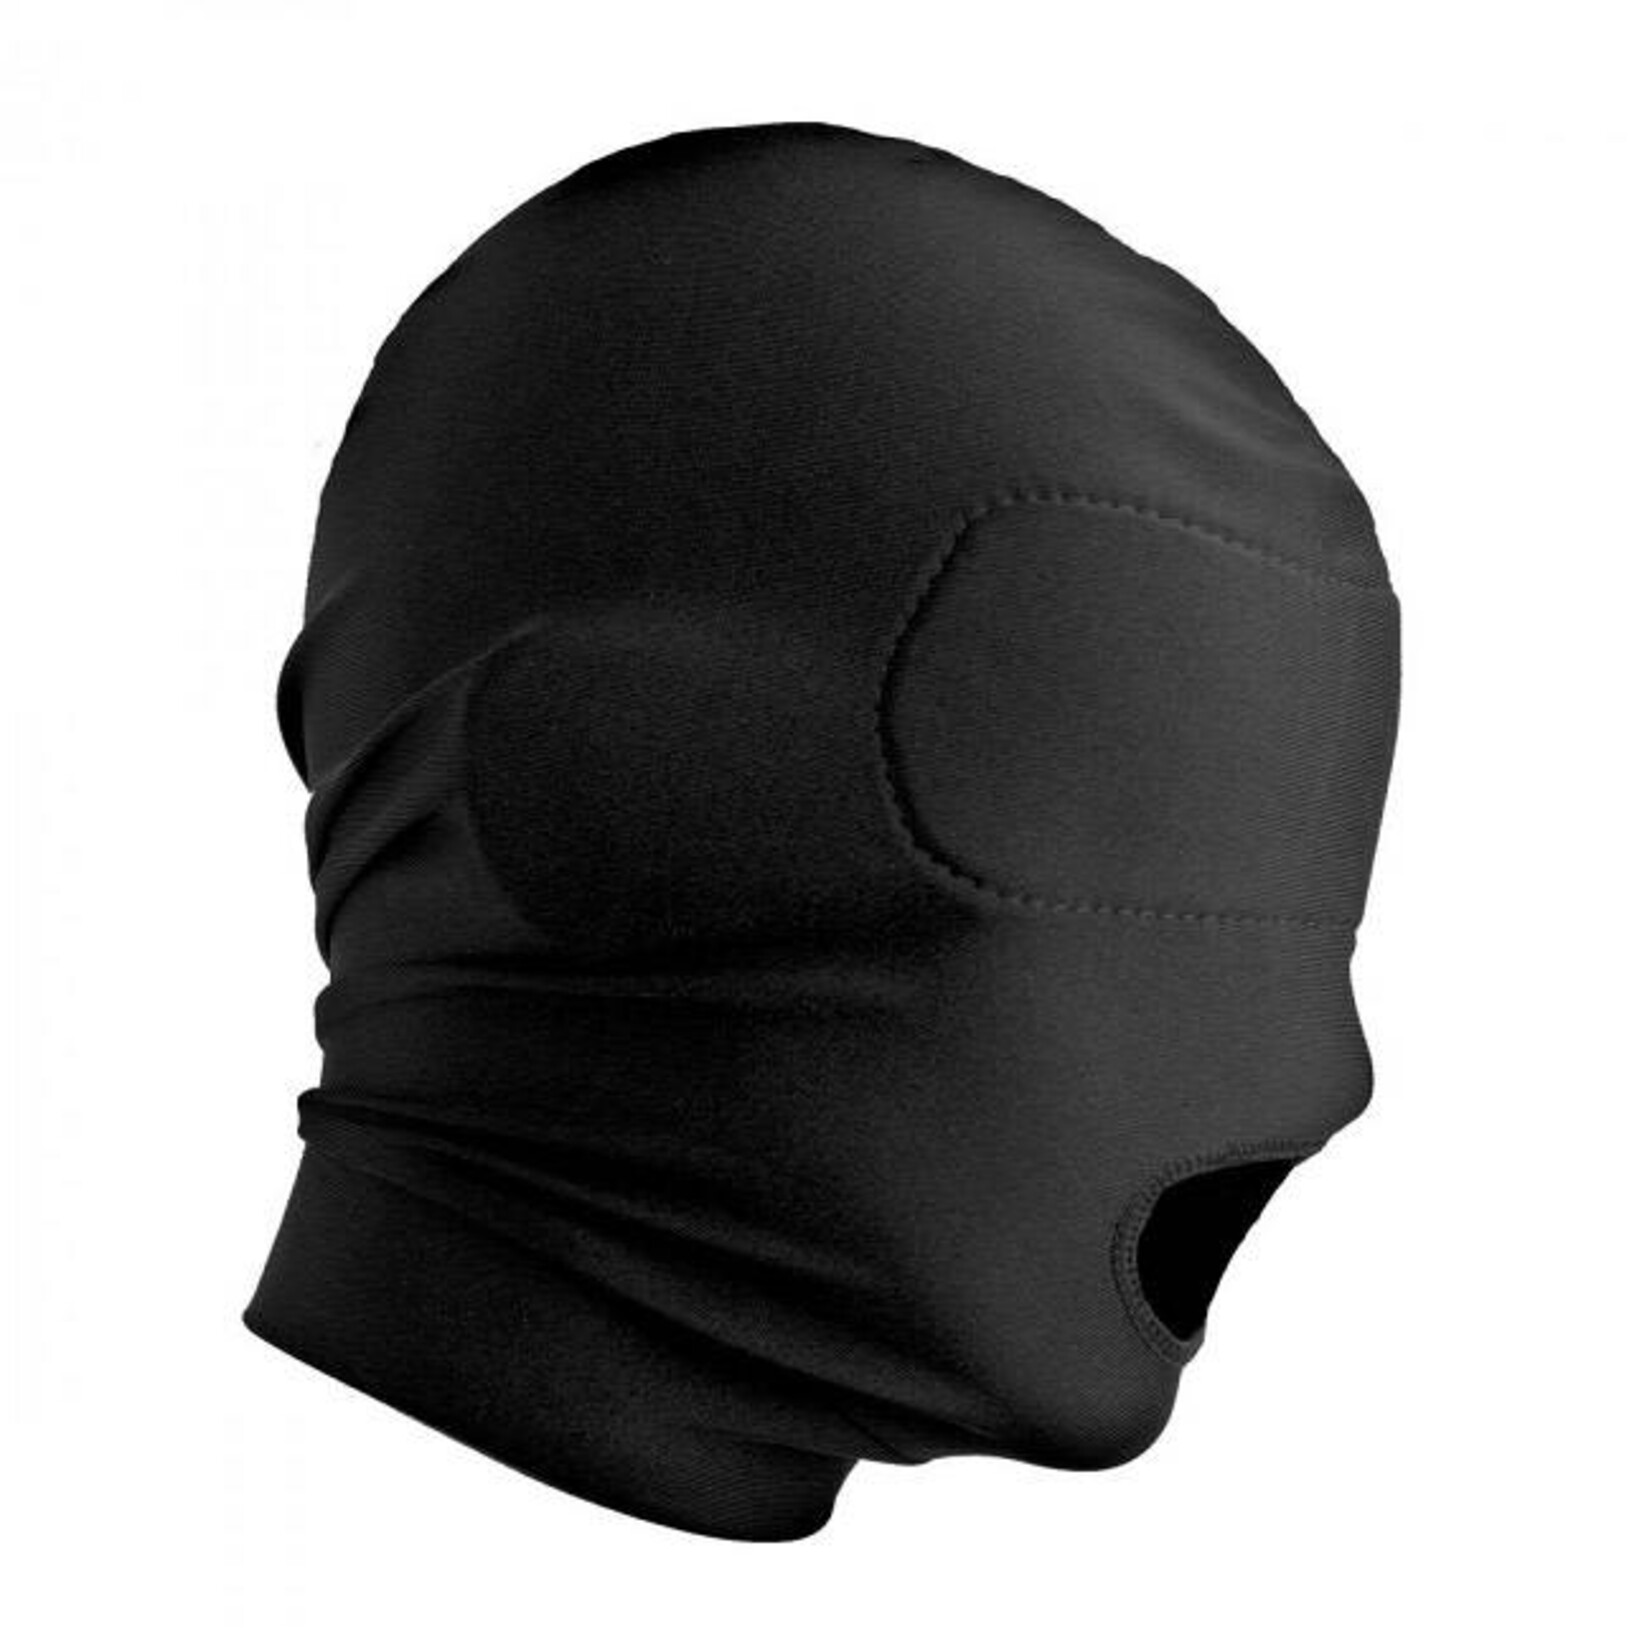 Master Series Master Series Disguise Open Mouth Hood with Padded Blindfold